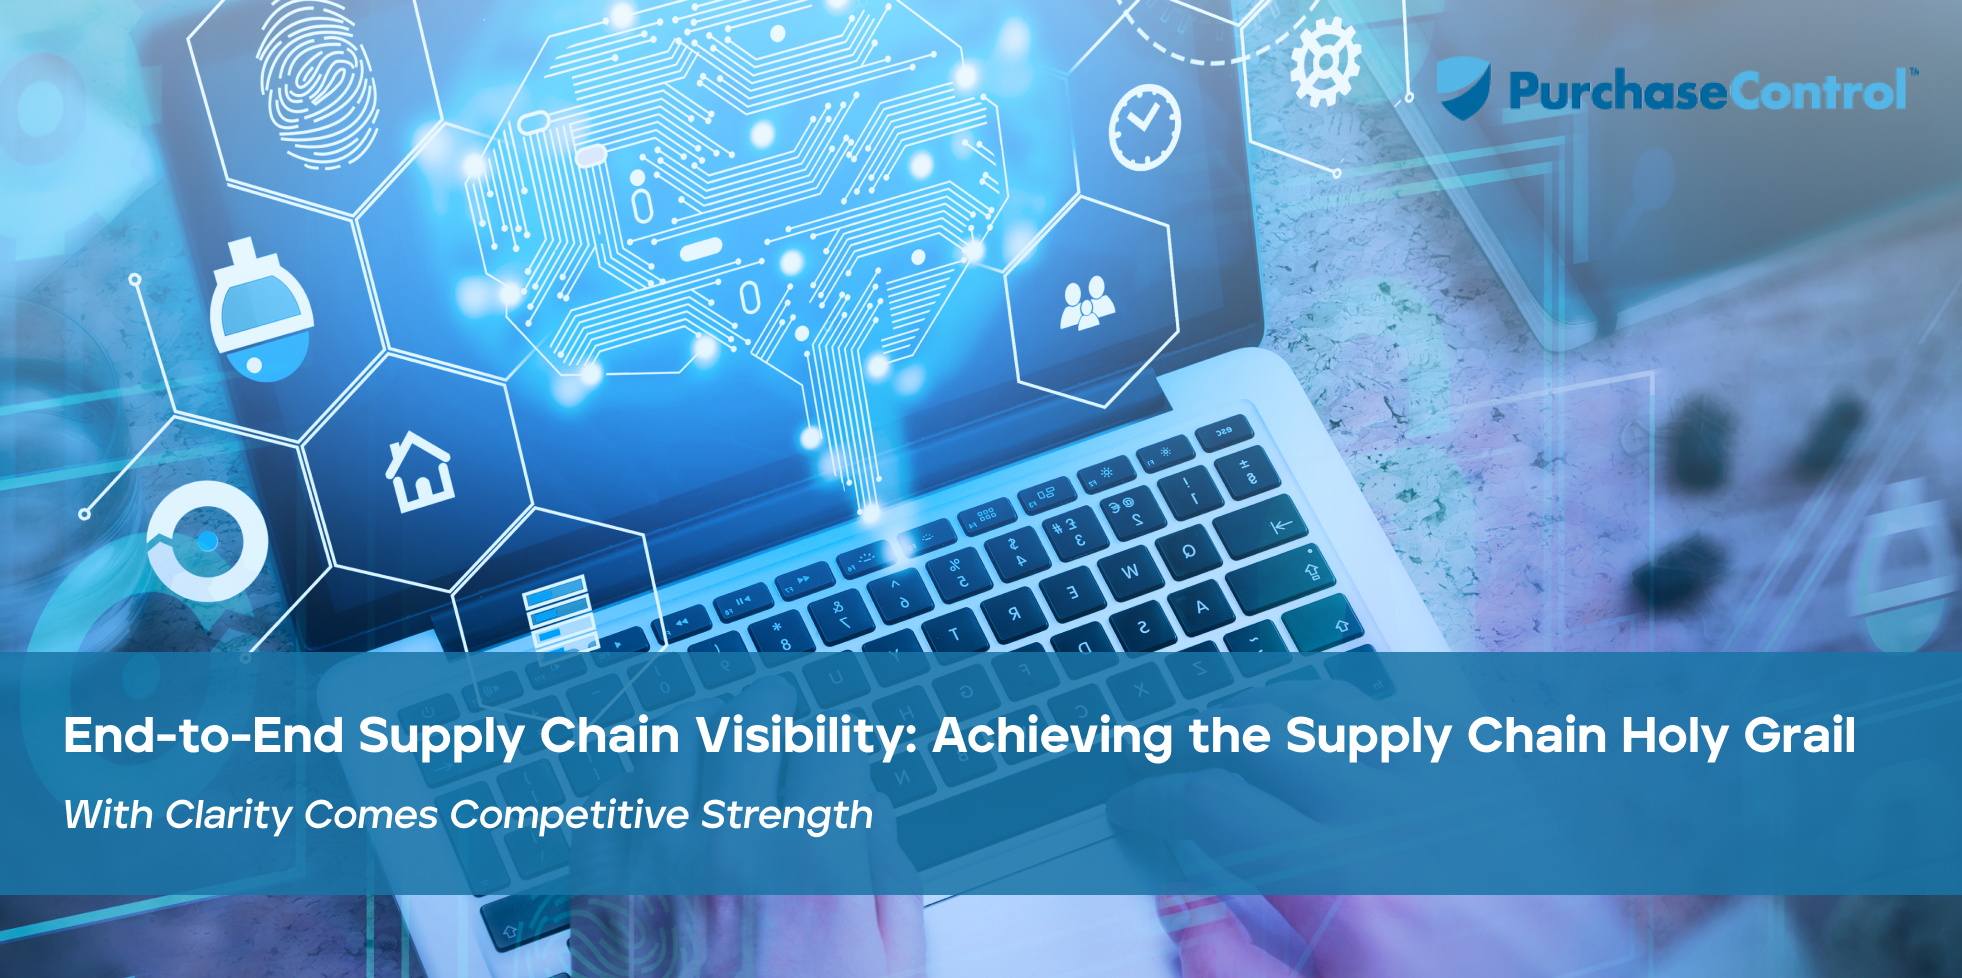 End-to-End-Supply-Chain-Visibility-Achieving-the-Supply-Chain-Holy-Grail